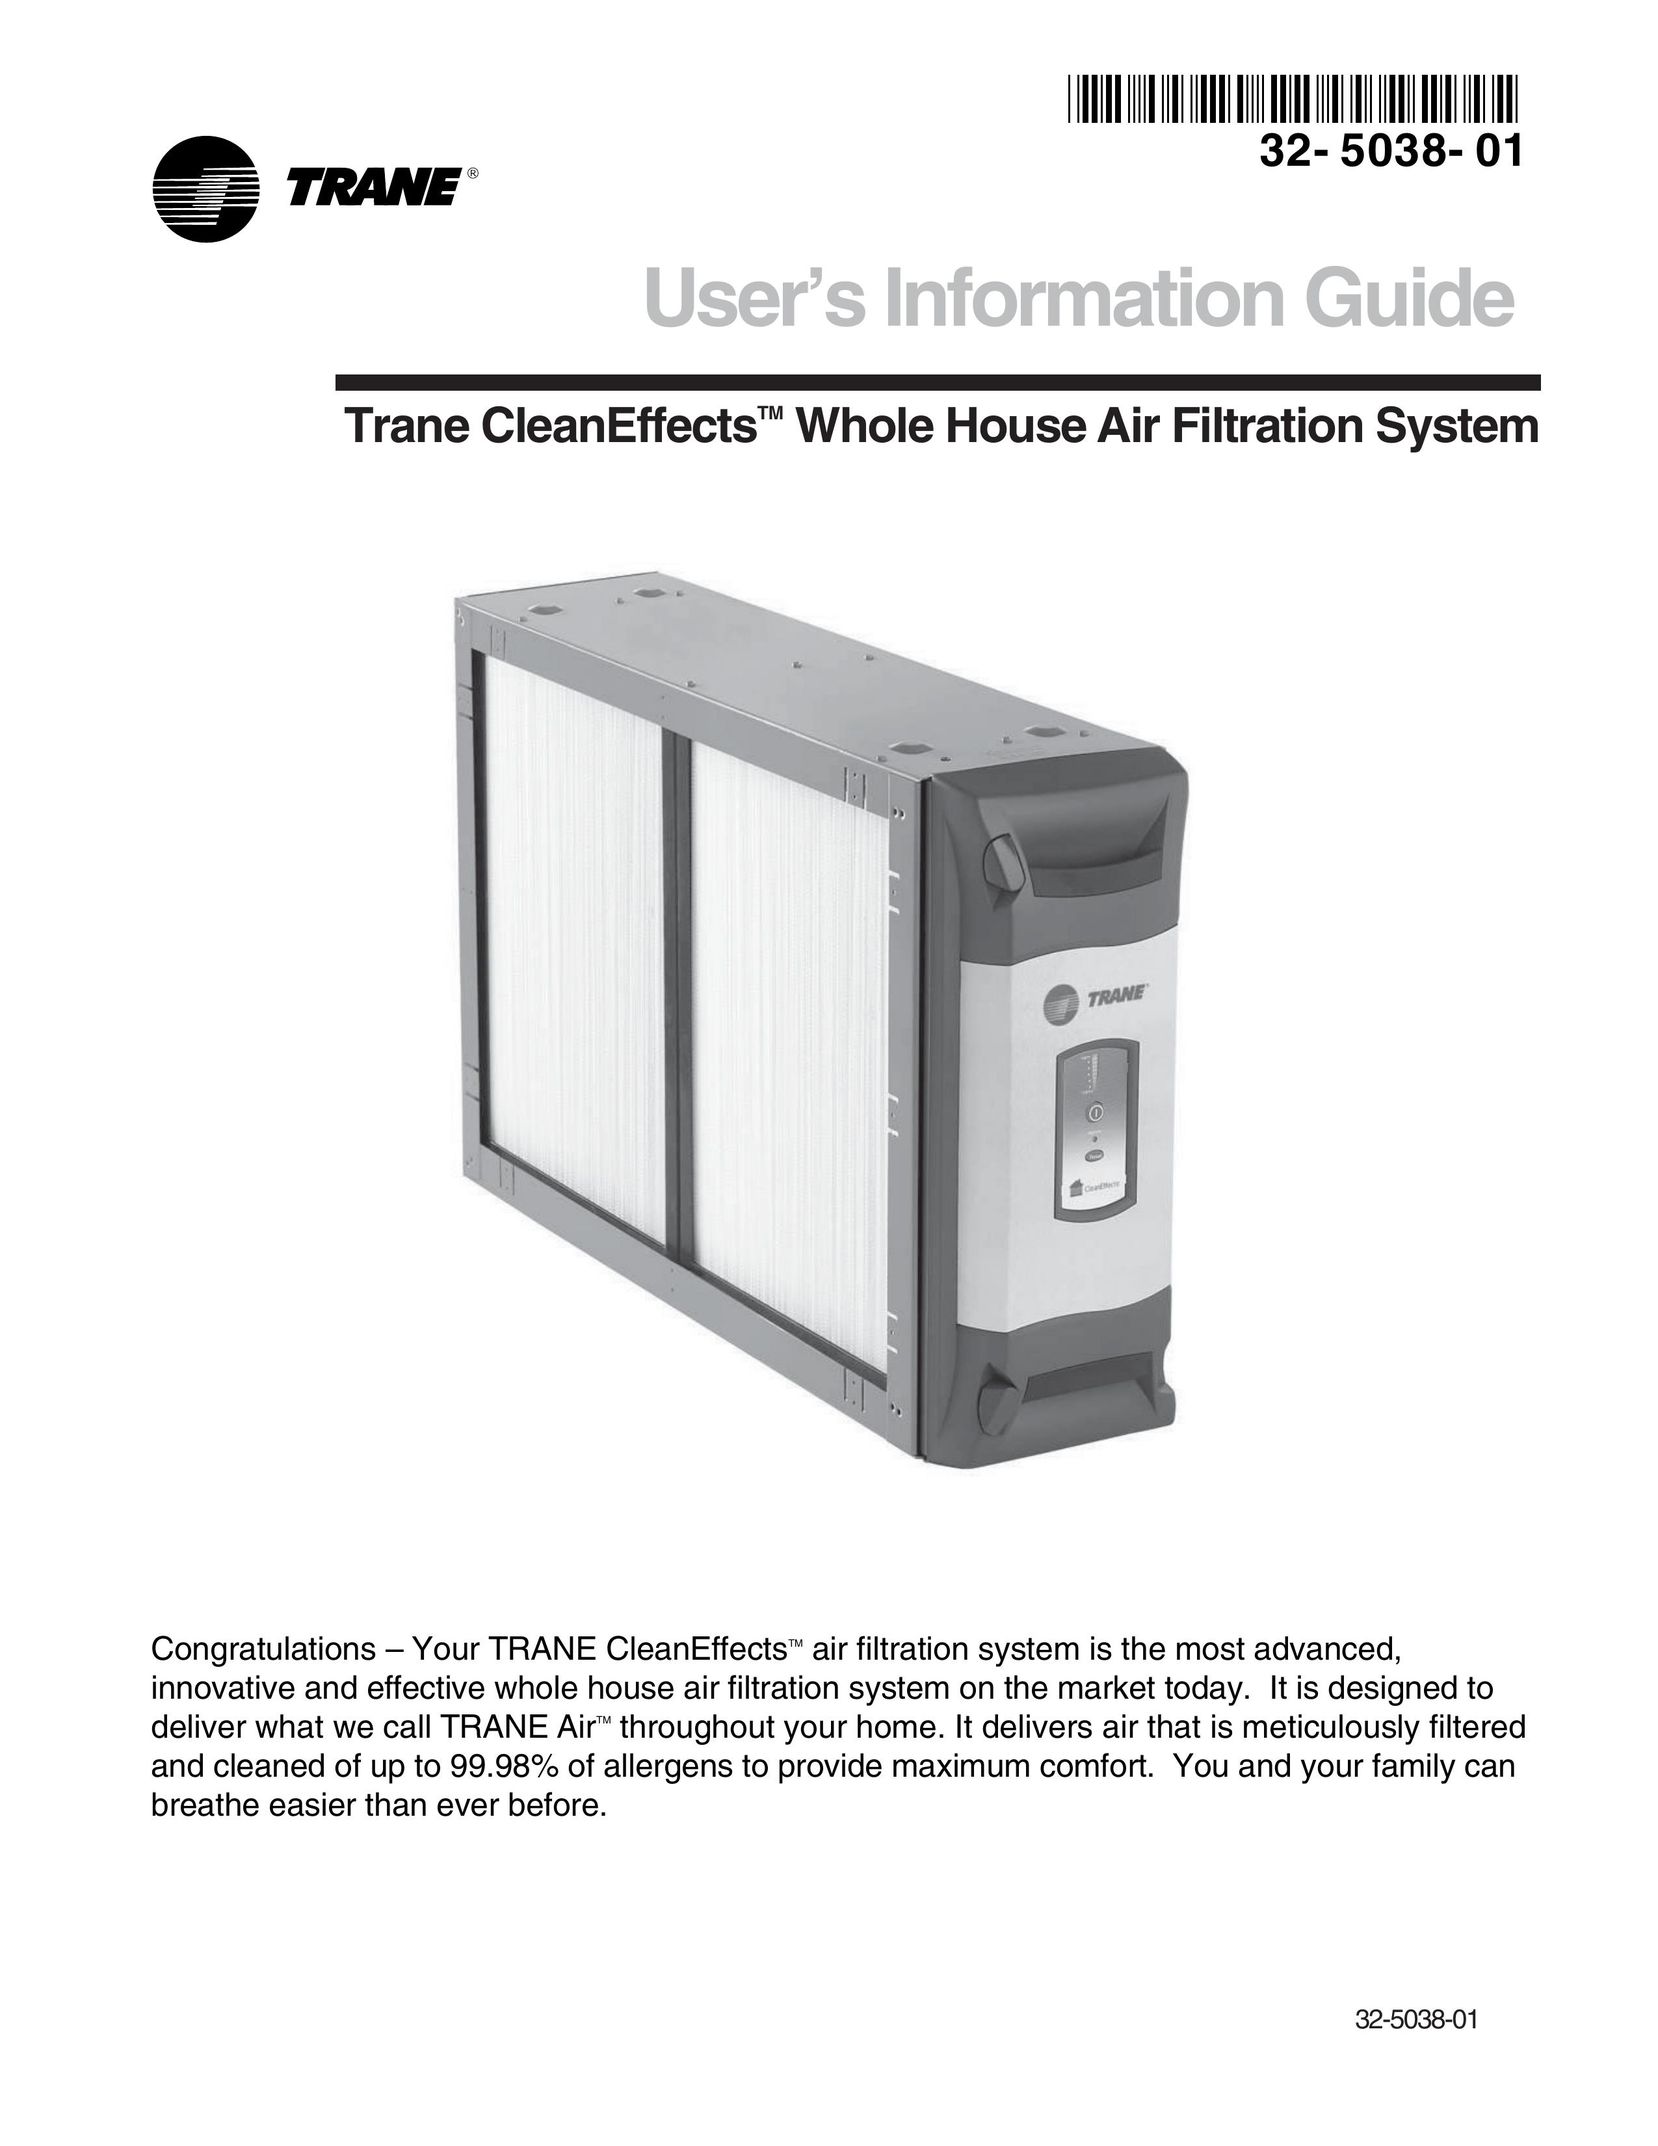 Trane Air Filtration System Air Cleaner User Manual